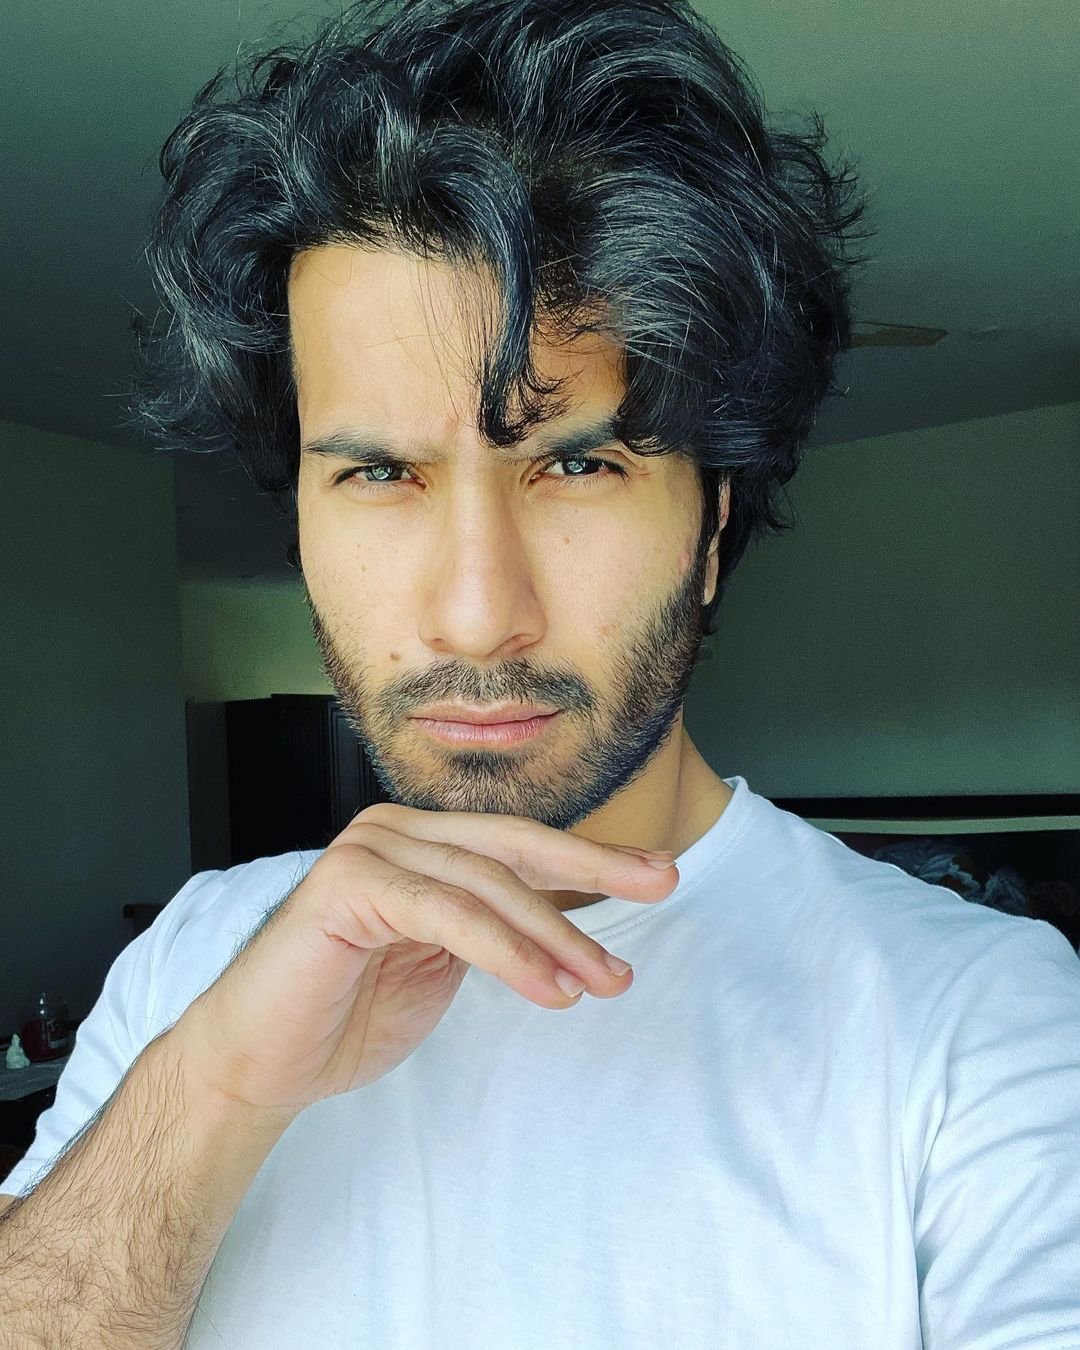 Feroze Khan is criticized by celebrities for sharing personal data